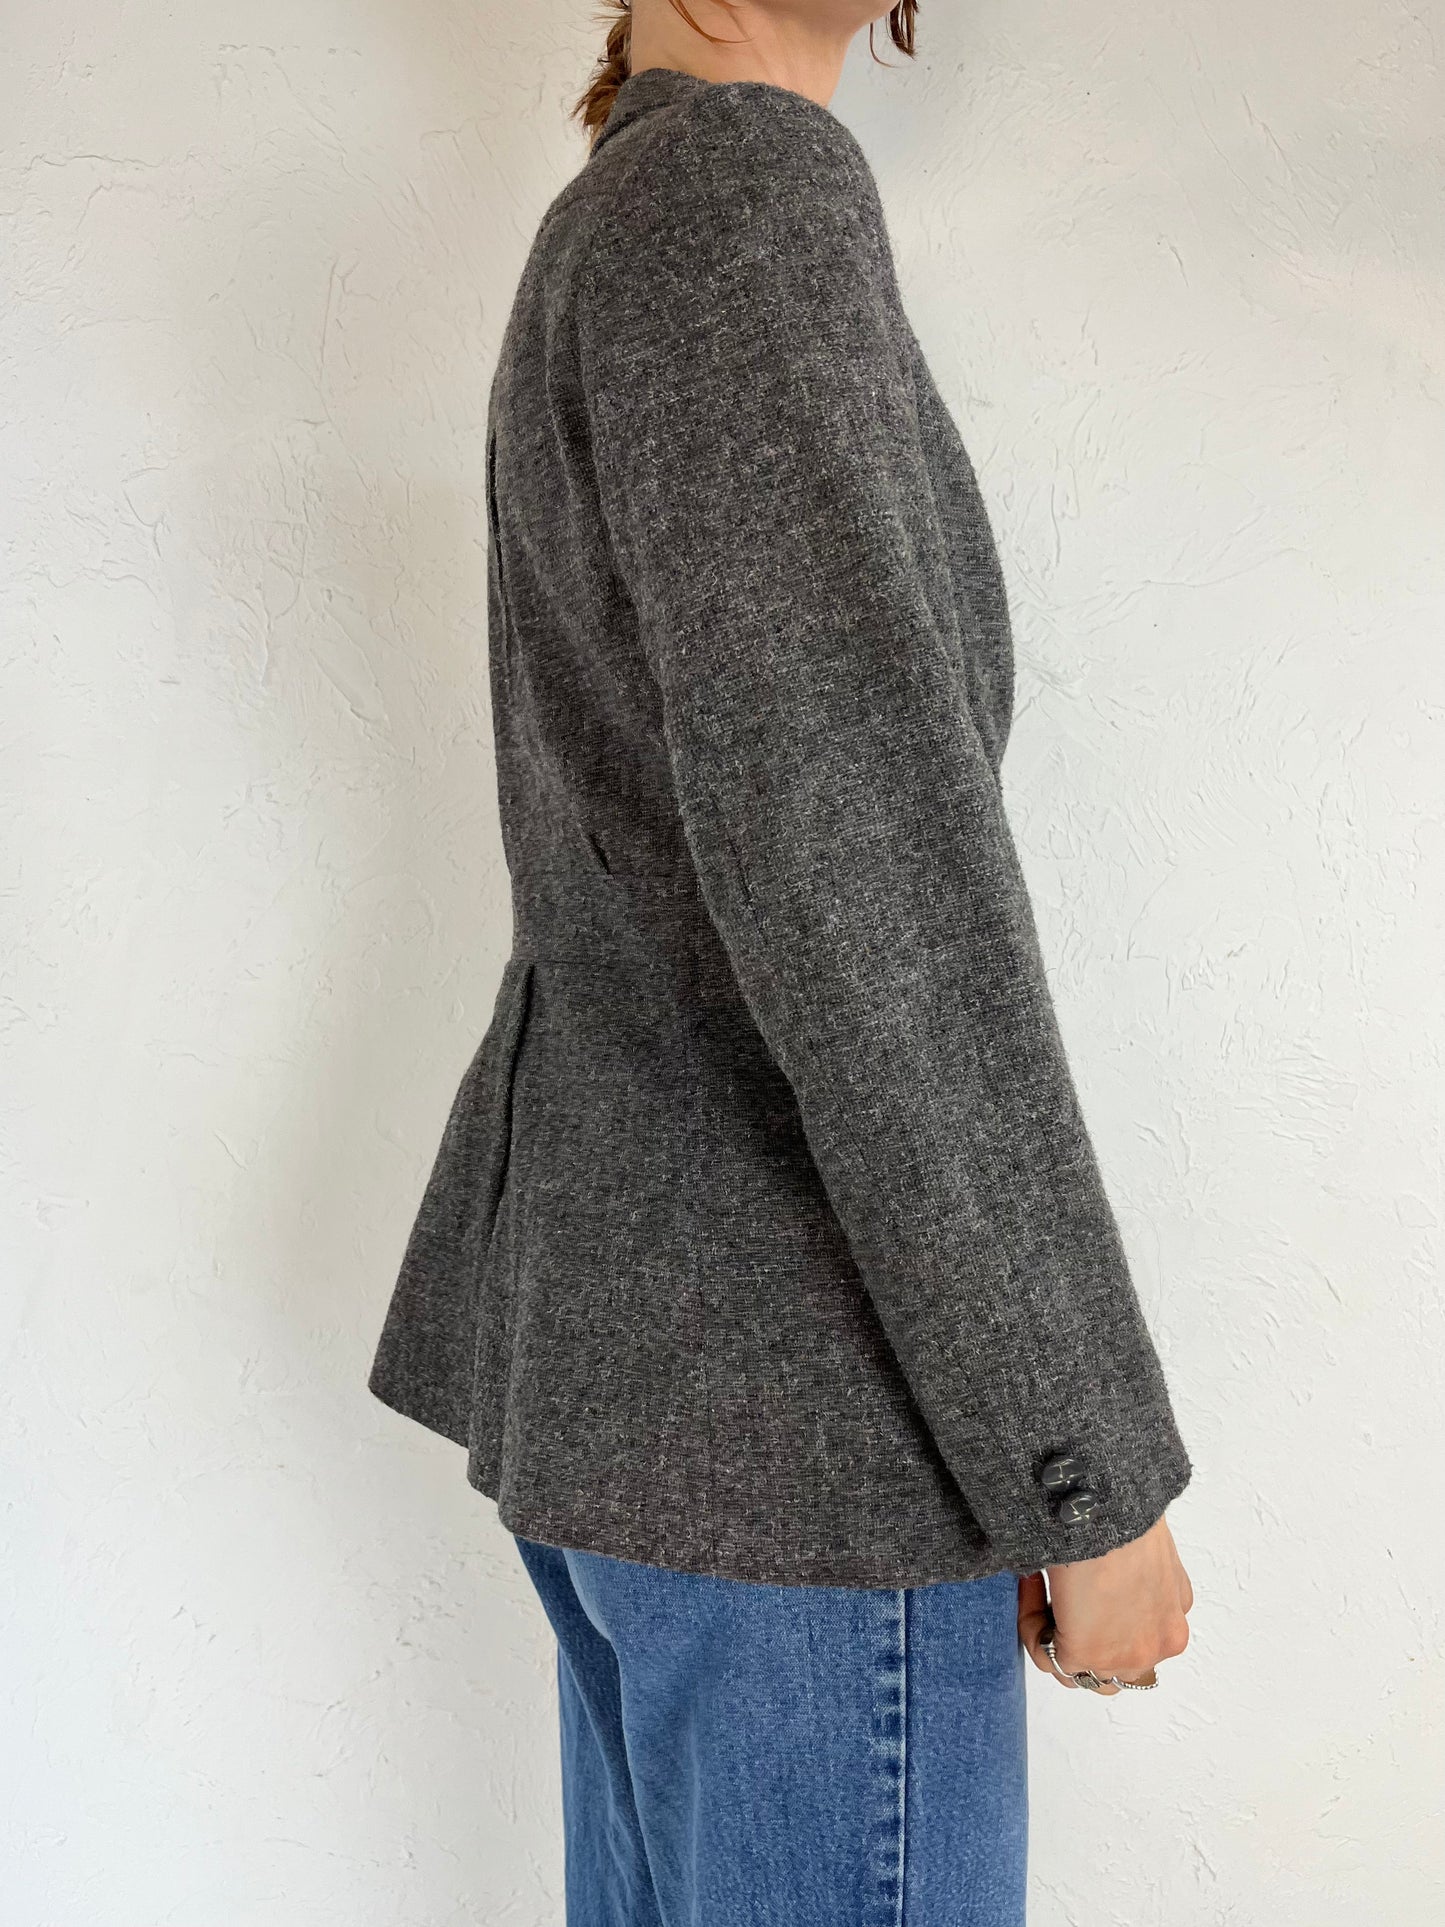 90s 'Rickis' Gray Wool Fitted Blazer Jacket / Small